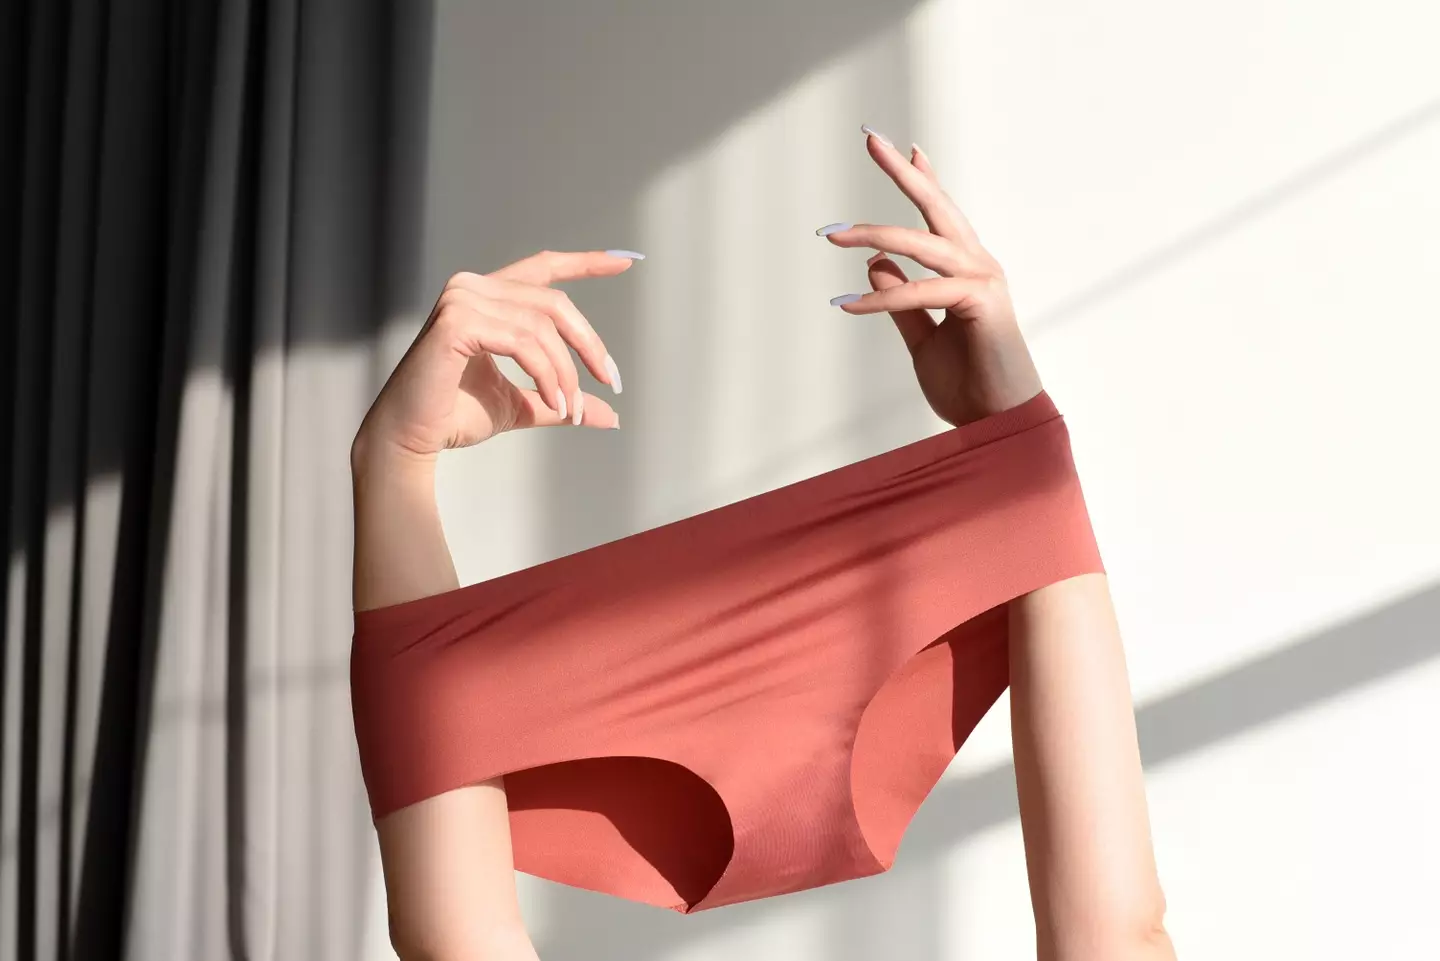 One doctor has warned against the health risks of not changing your underwear everyday.